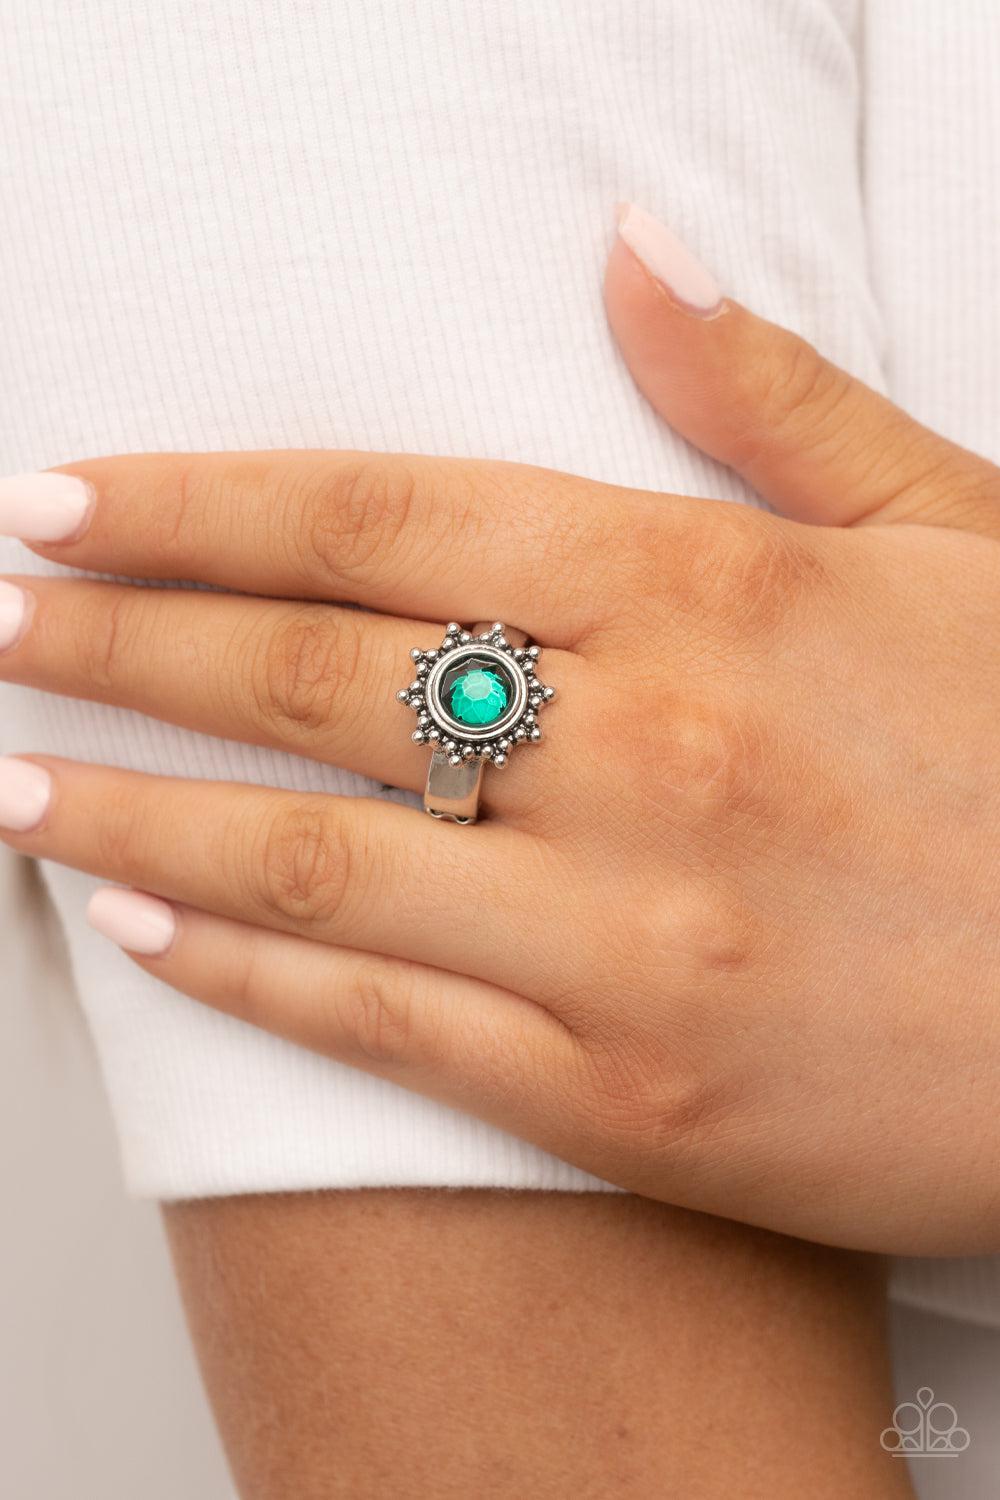 Expect Sunshine and REIGN Green Rhinestone Ring - Paparazzi Accessories- lightbox - CarasShop.com - $5 Jewelry by Cara Jewels